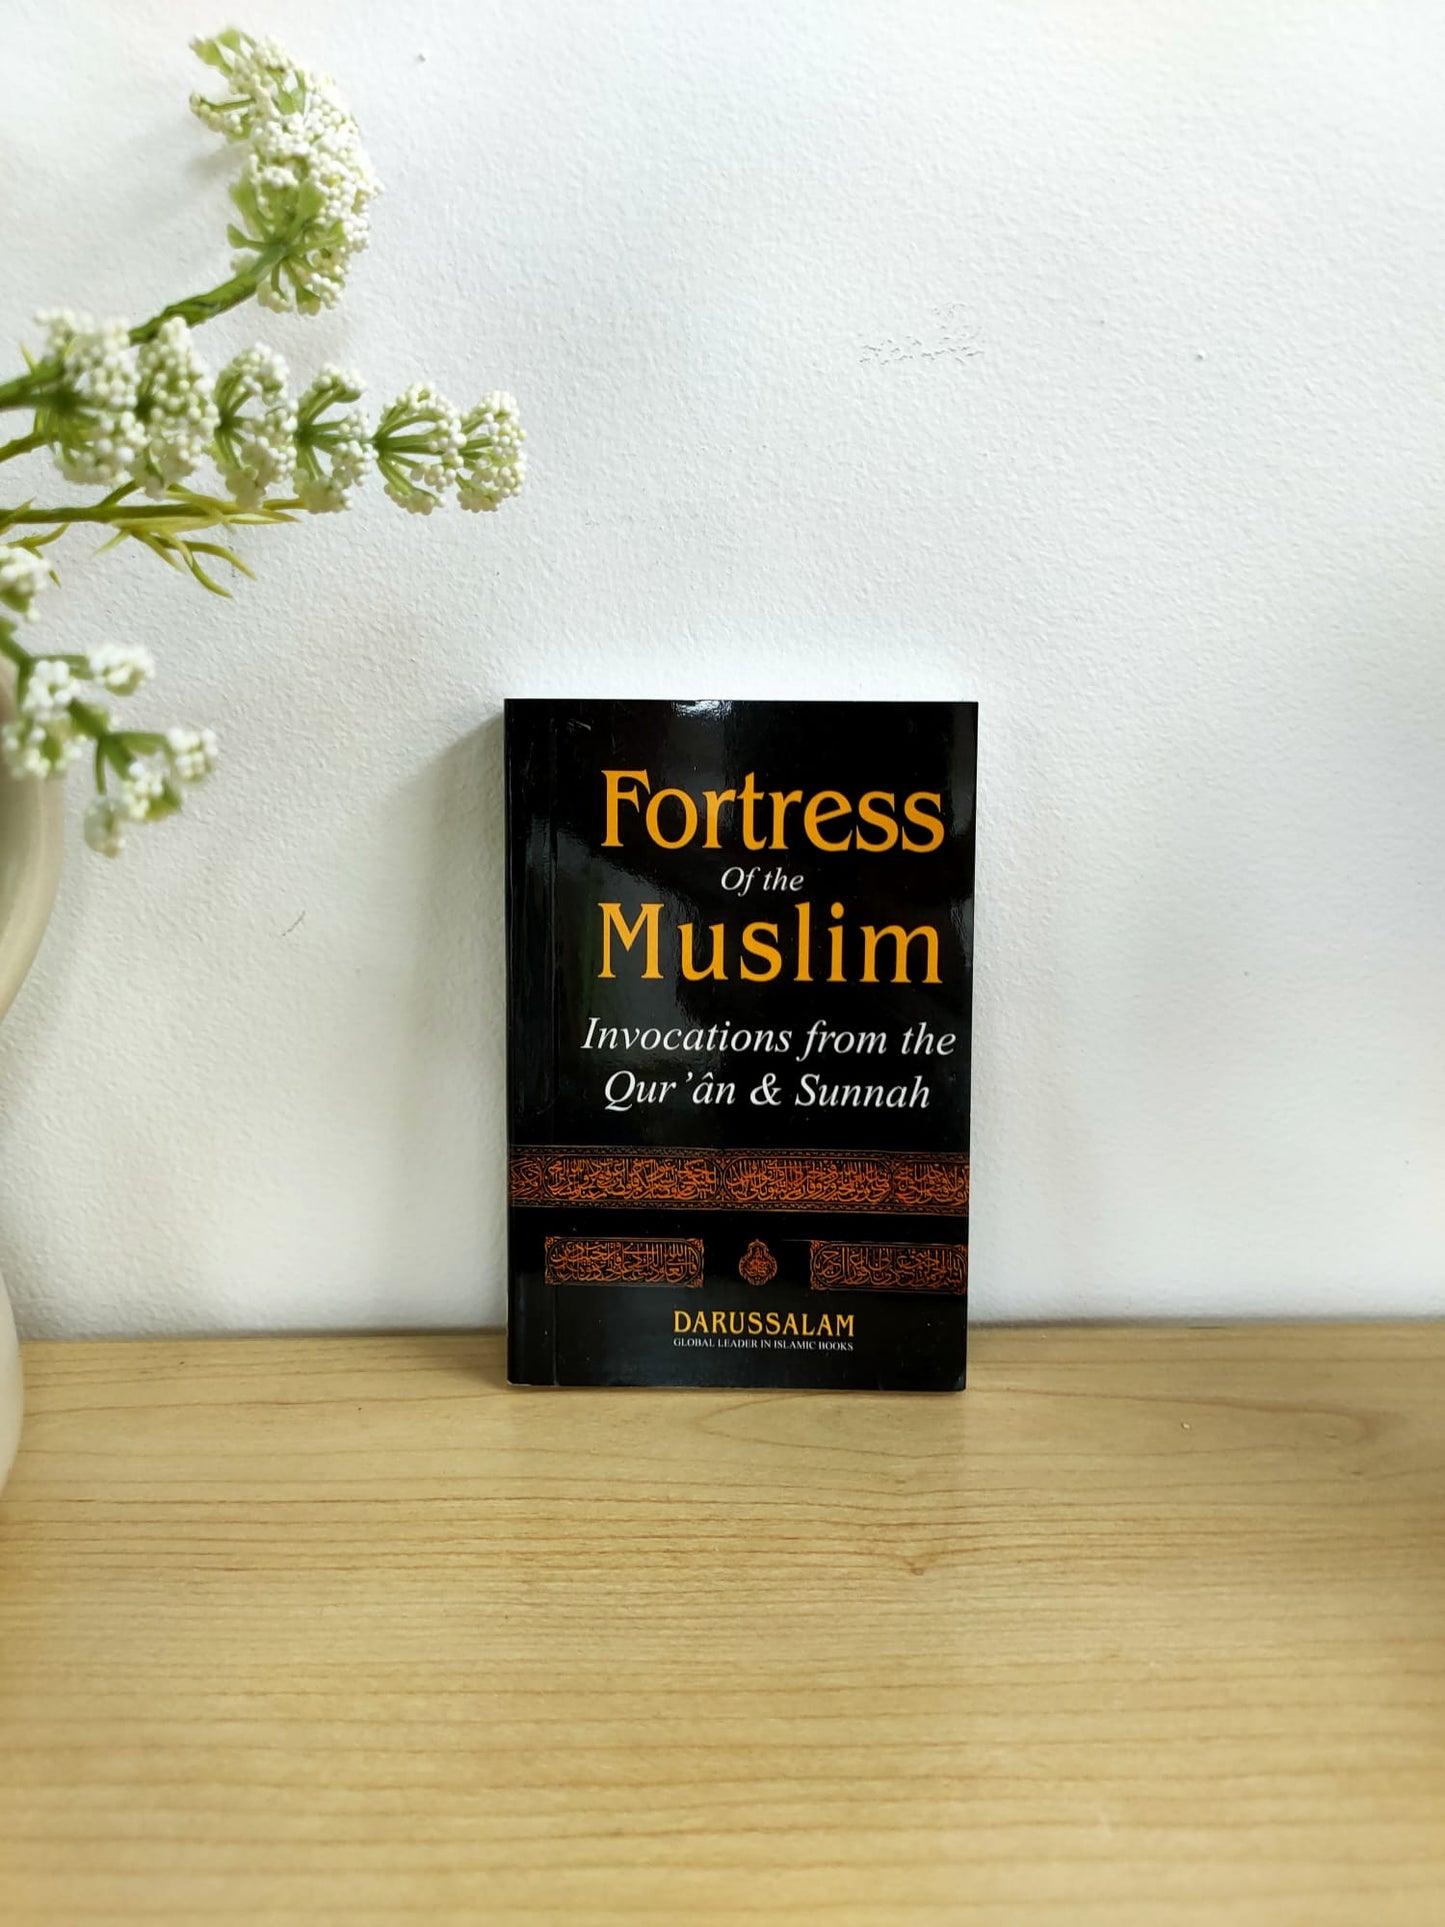 Discover the Fortress of the Muslim book at Hikmah Boutique. This comprehensive collection of authentic duas and supplications is your guide to invoking blessings, seeking protection, and connecting with Allah. Elevate your practice of following the Sunnah and empower your Islamic spiritual journey.